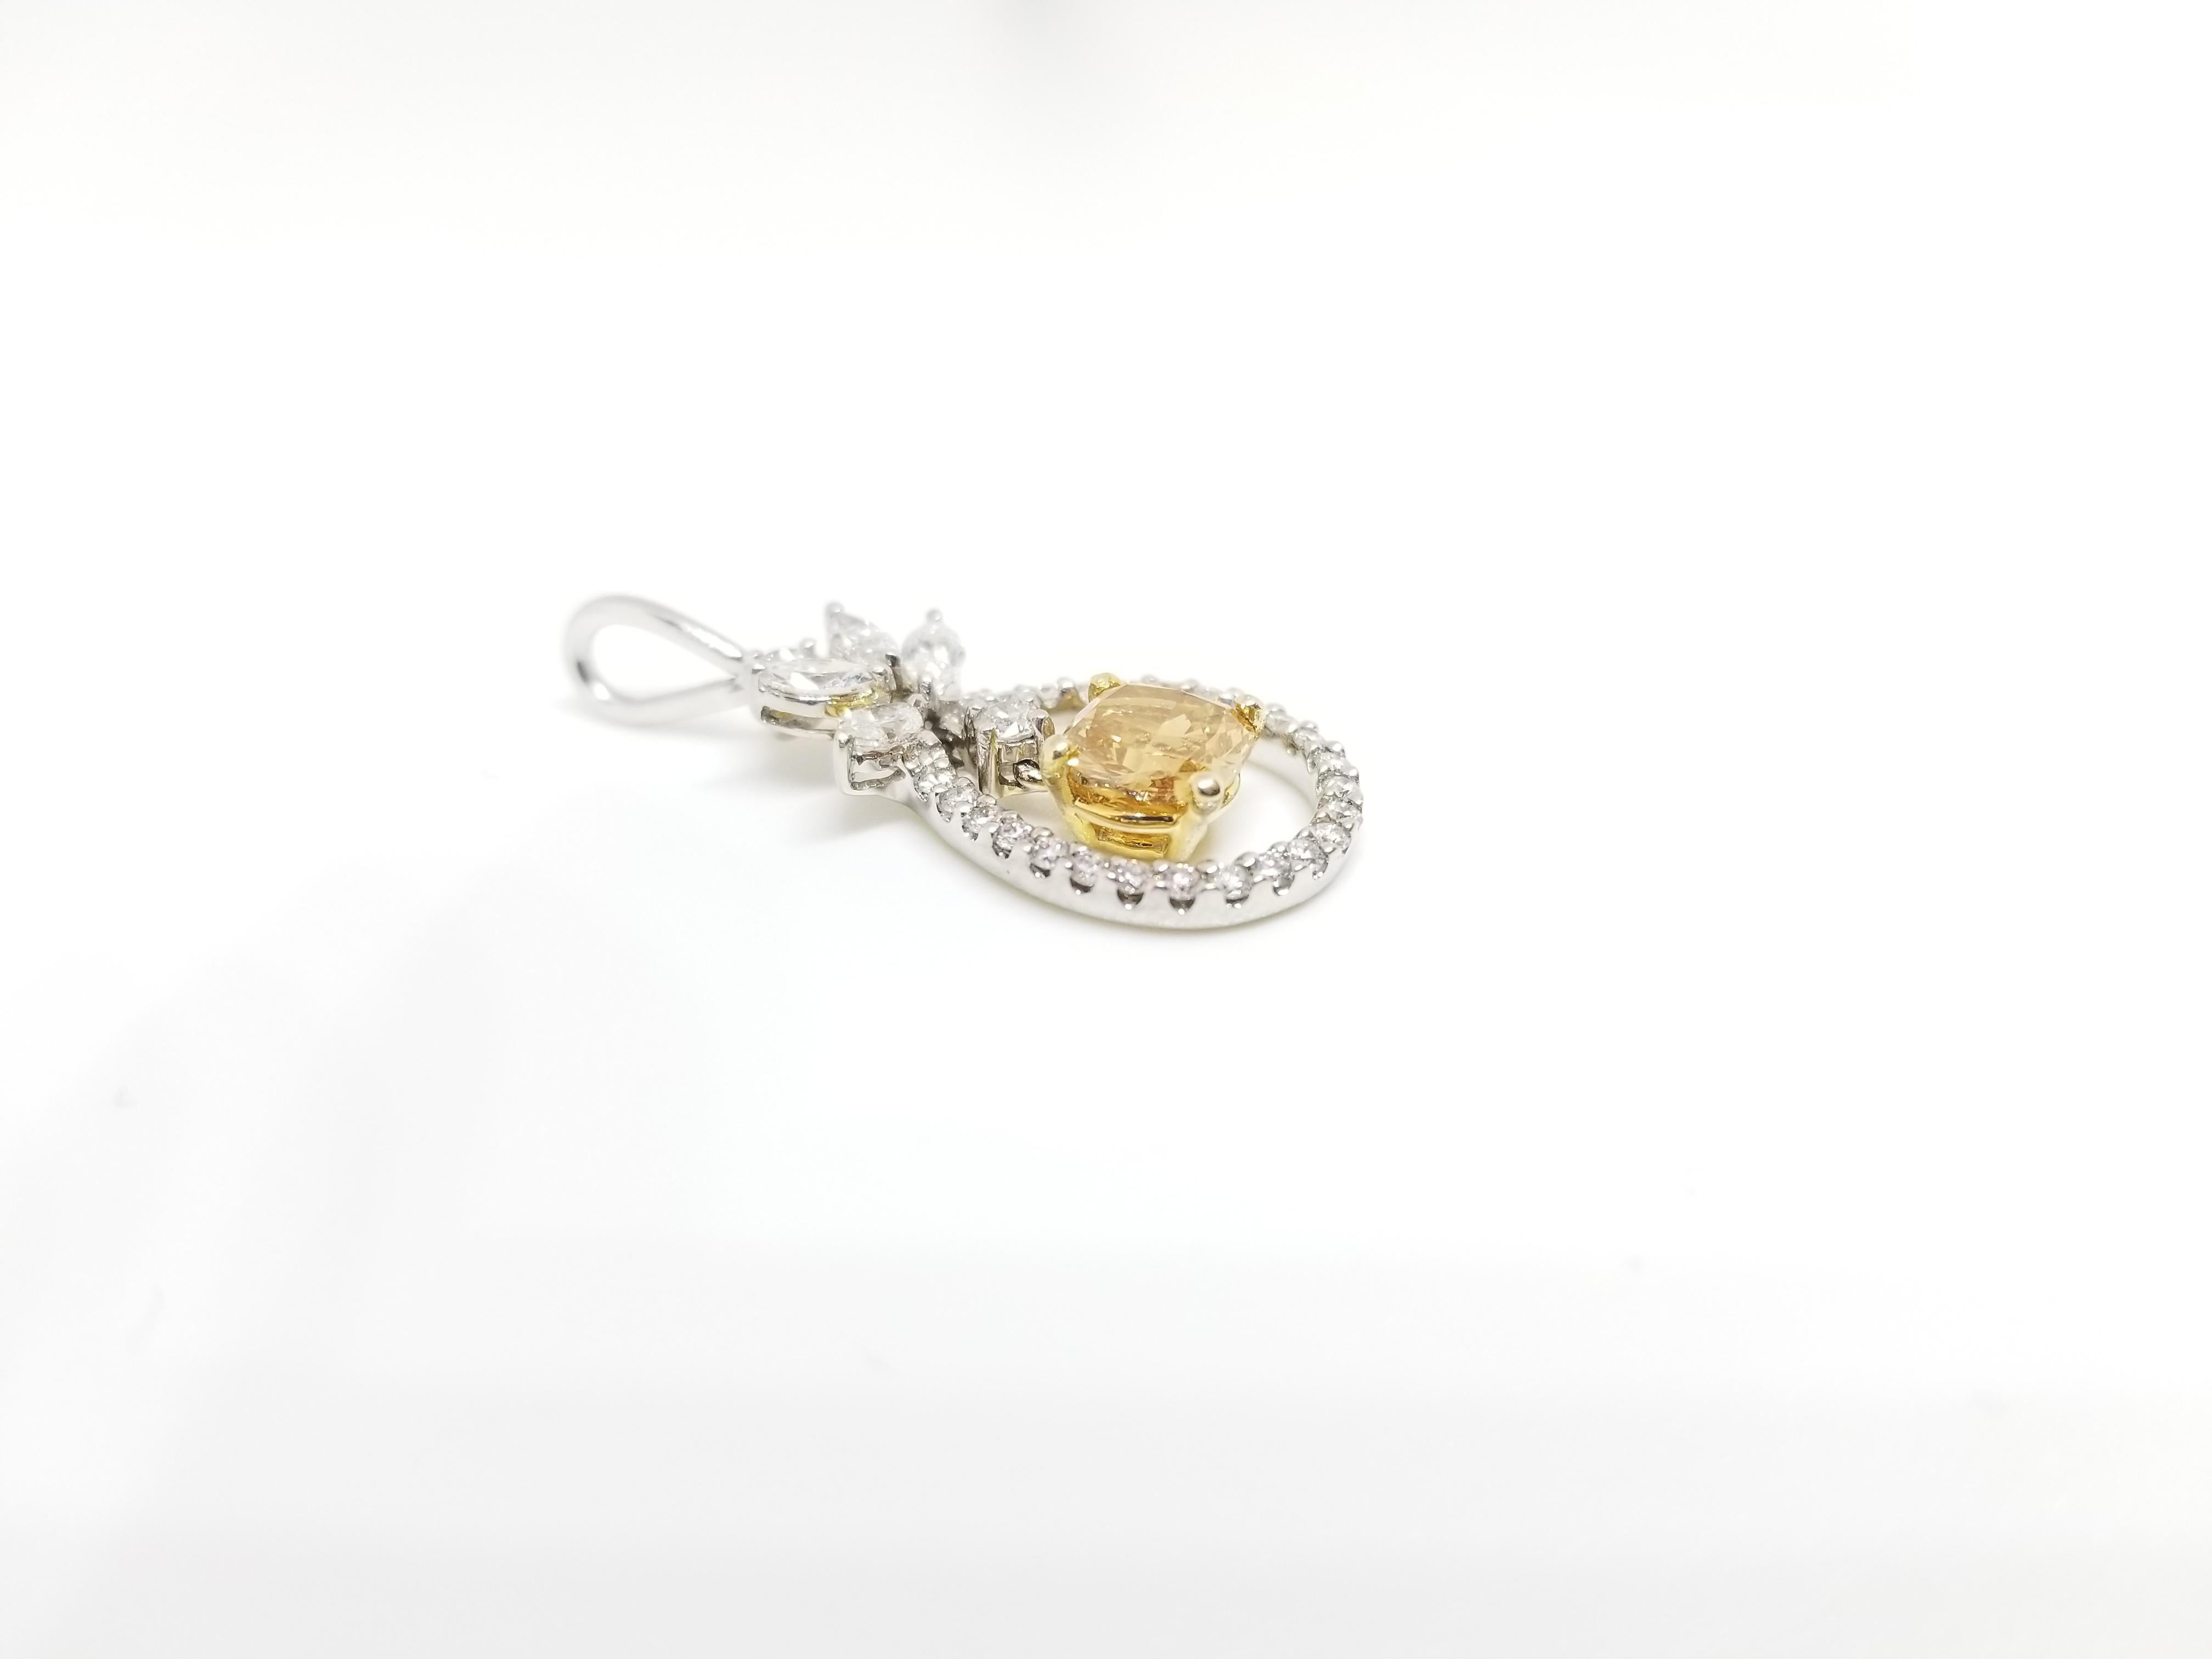 Gorgeous fancy deep orange-yellow color cushion cut diamond pendant, unique color combination cushion weighing 0.80ct GIA, surround by mixed white marquise and round brilliant cut diamonds. set in 14k white gold. pendant measures approximately 1